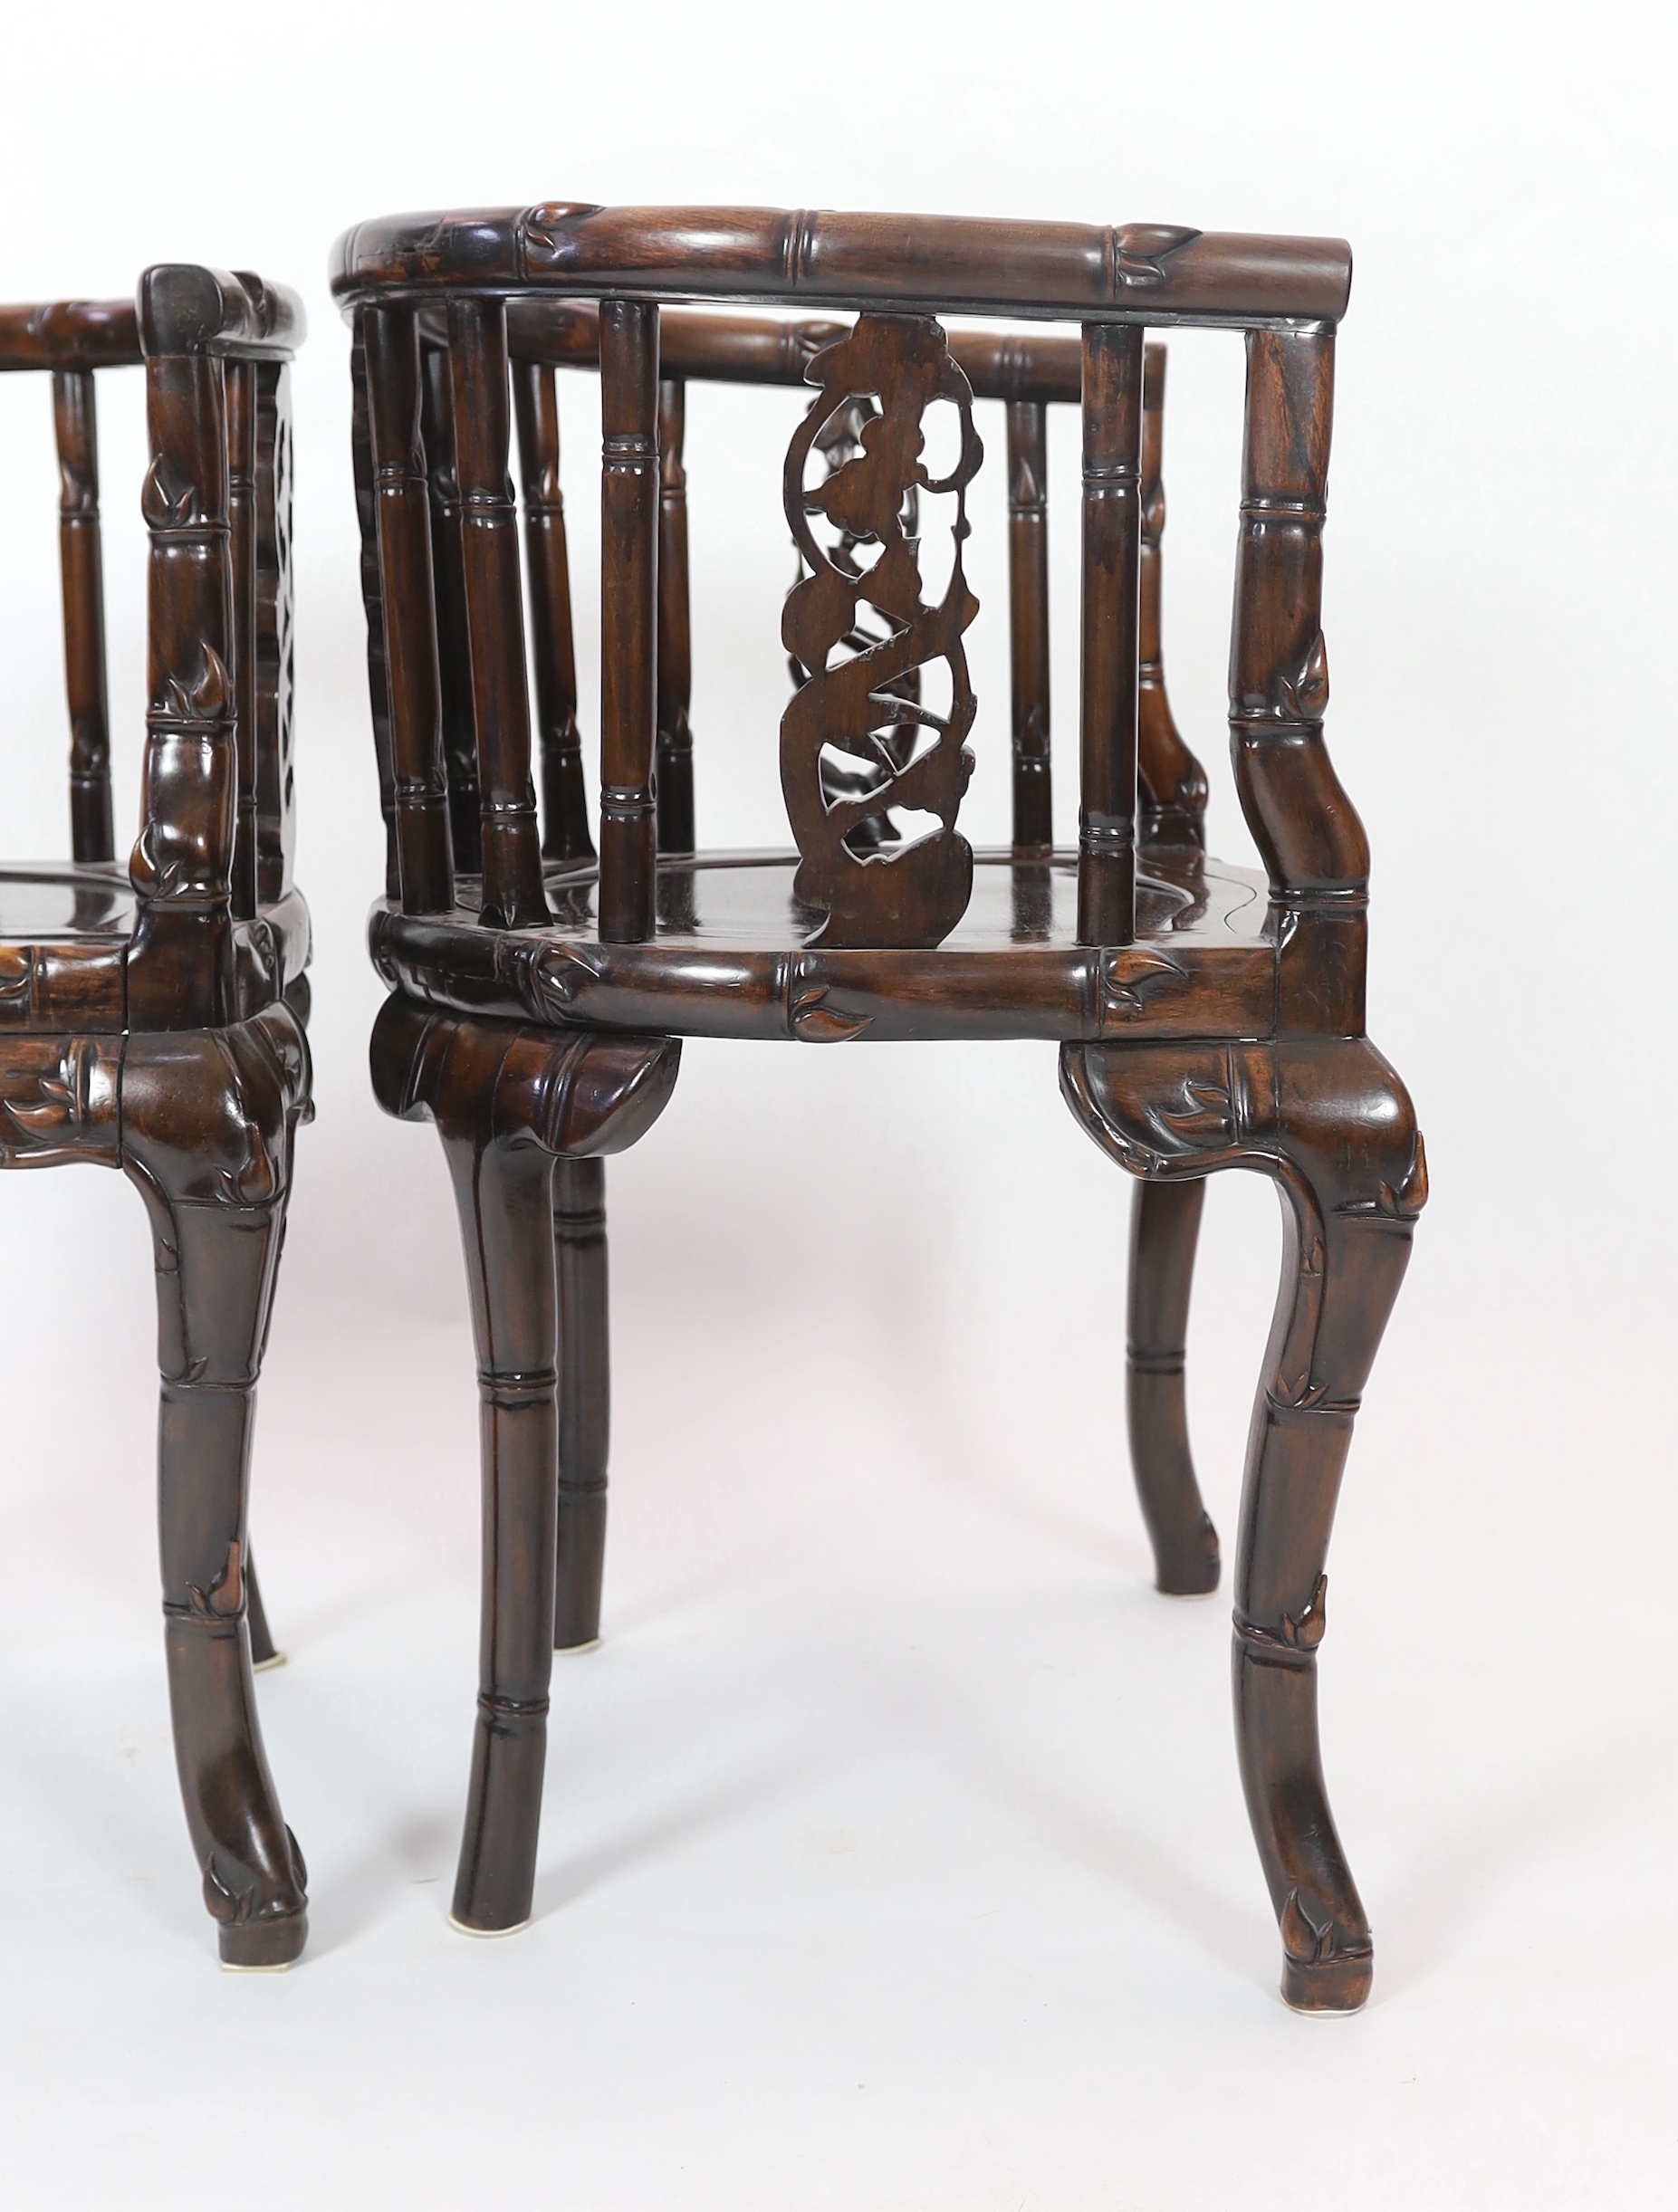 A pair of Chinese hongmu tub-shaped armchairs, late 19th century, carved in imitation of bamboo - Image 3 of 3